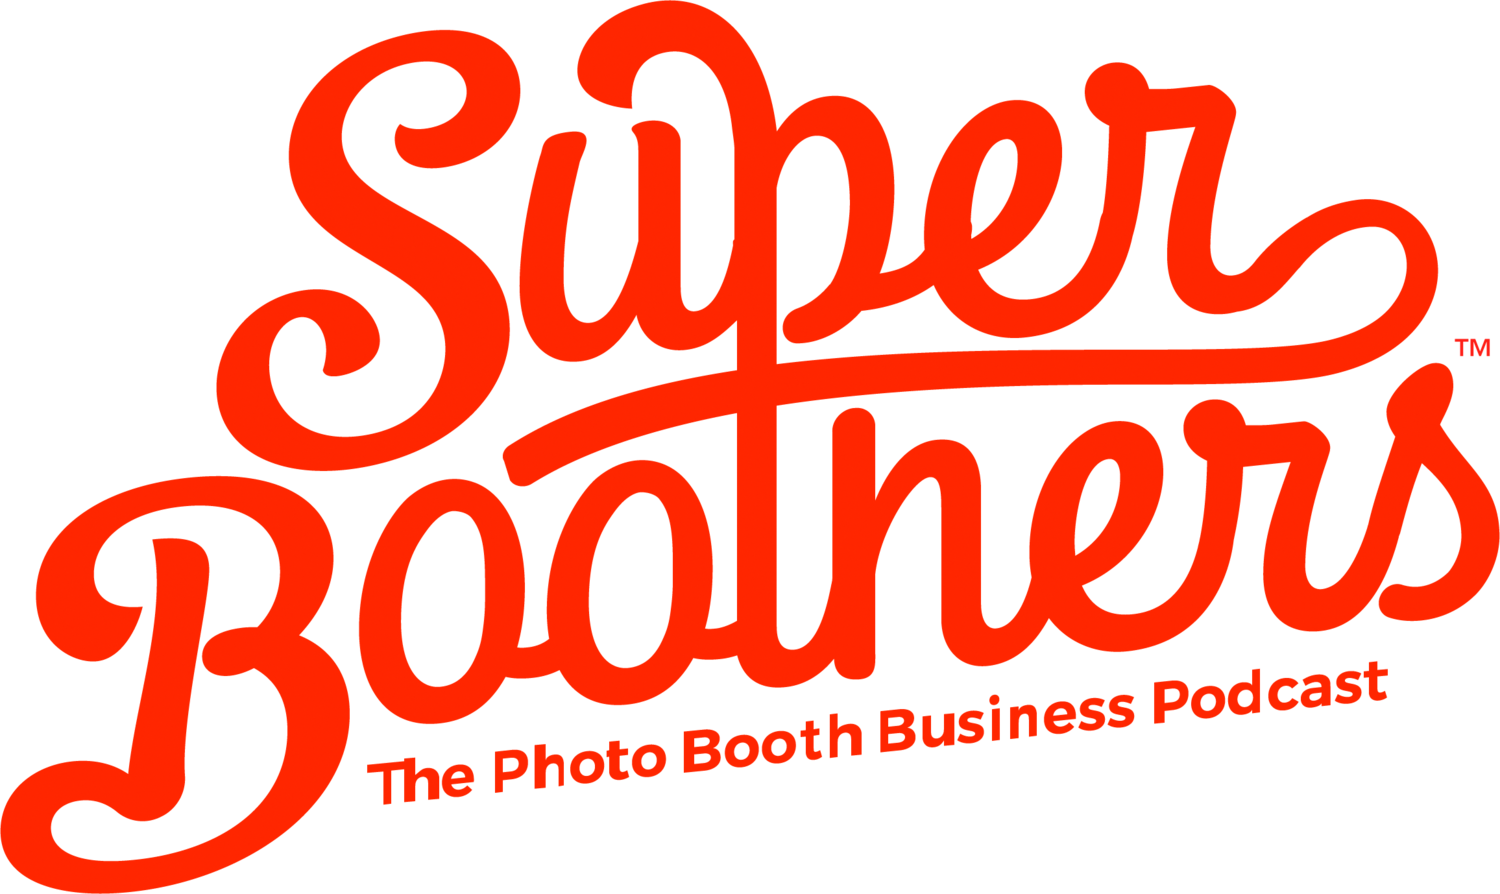 Super Boothers - The Photo Booth Business Podcast